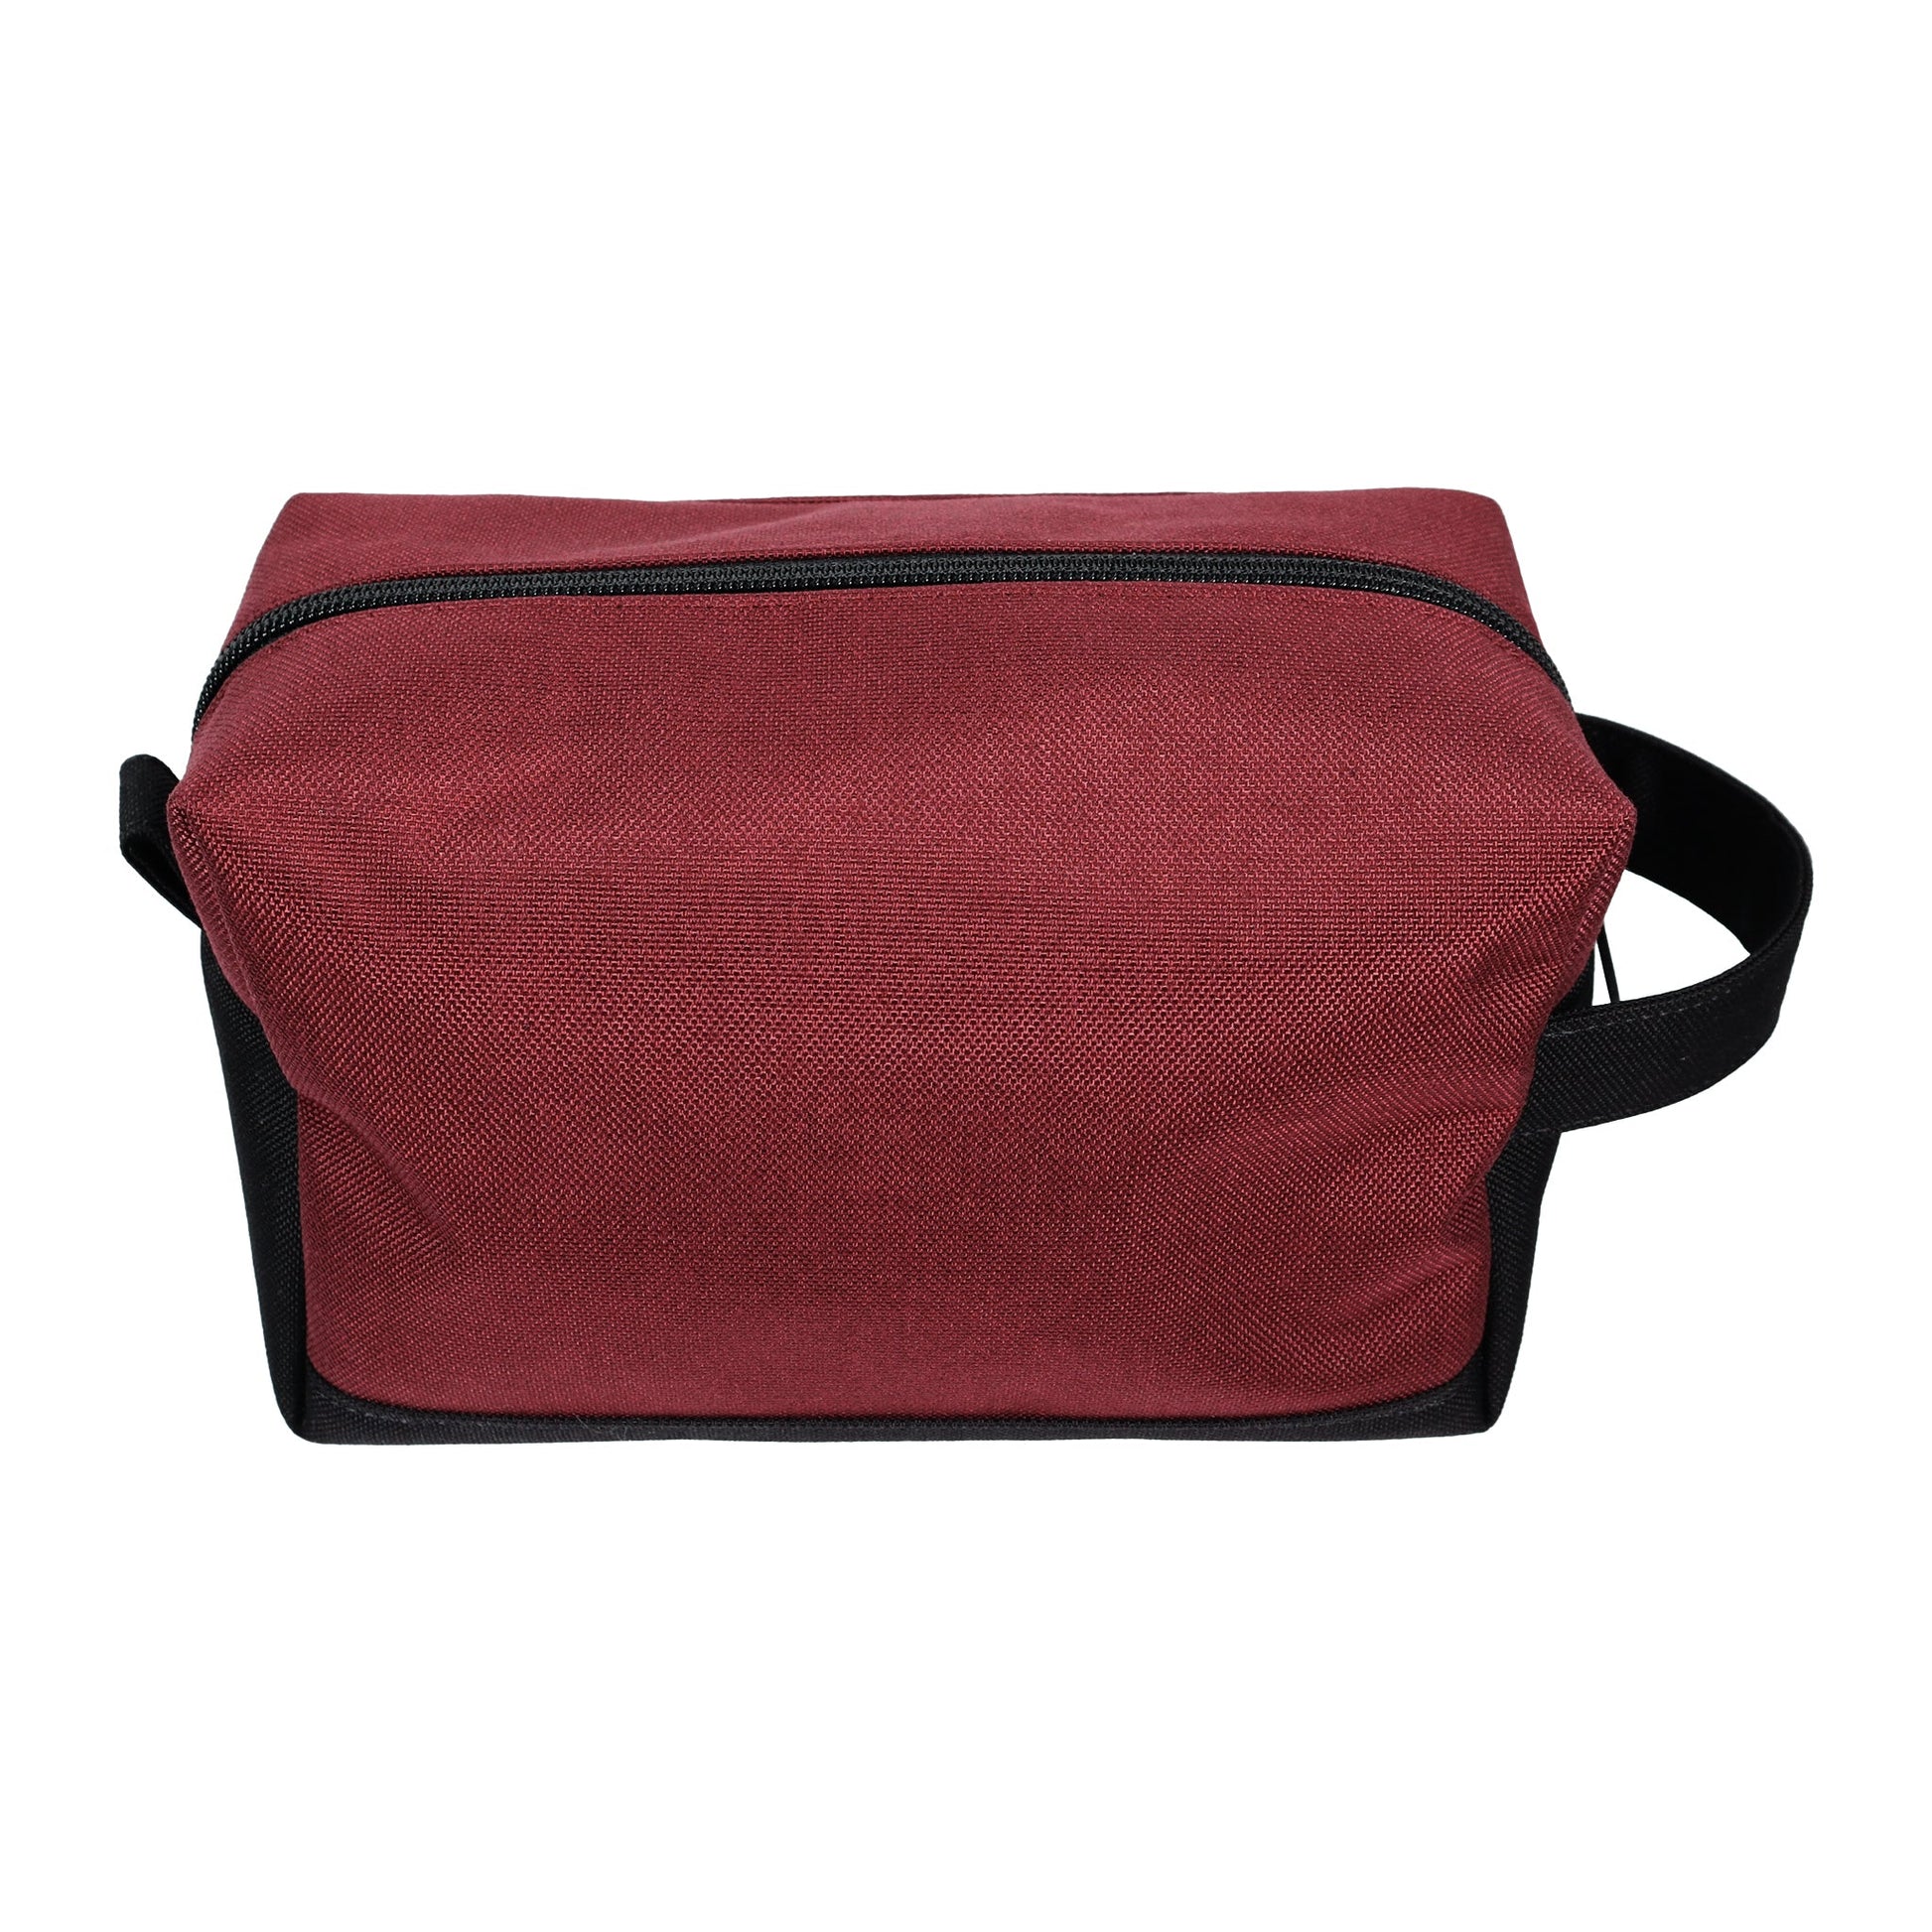 Red and Black Tall Canvas Toiletry Bag